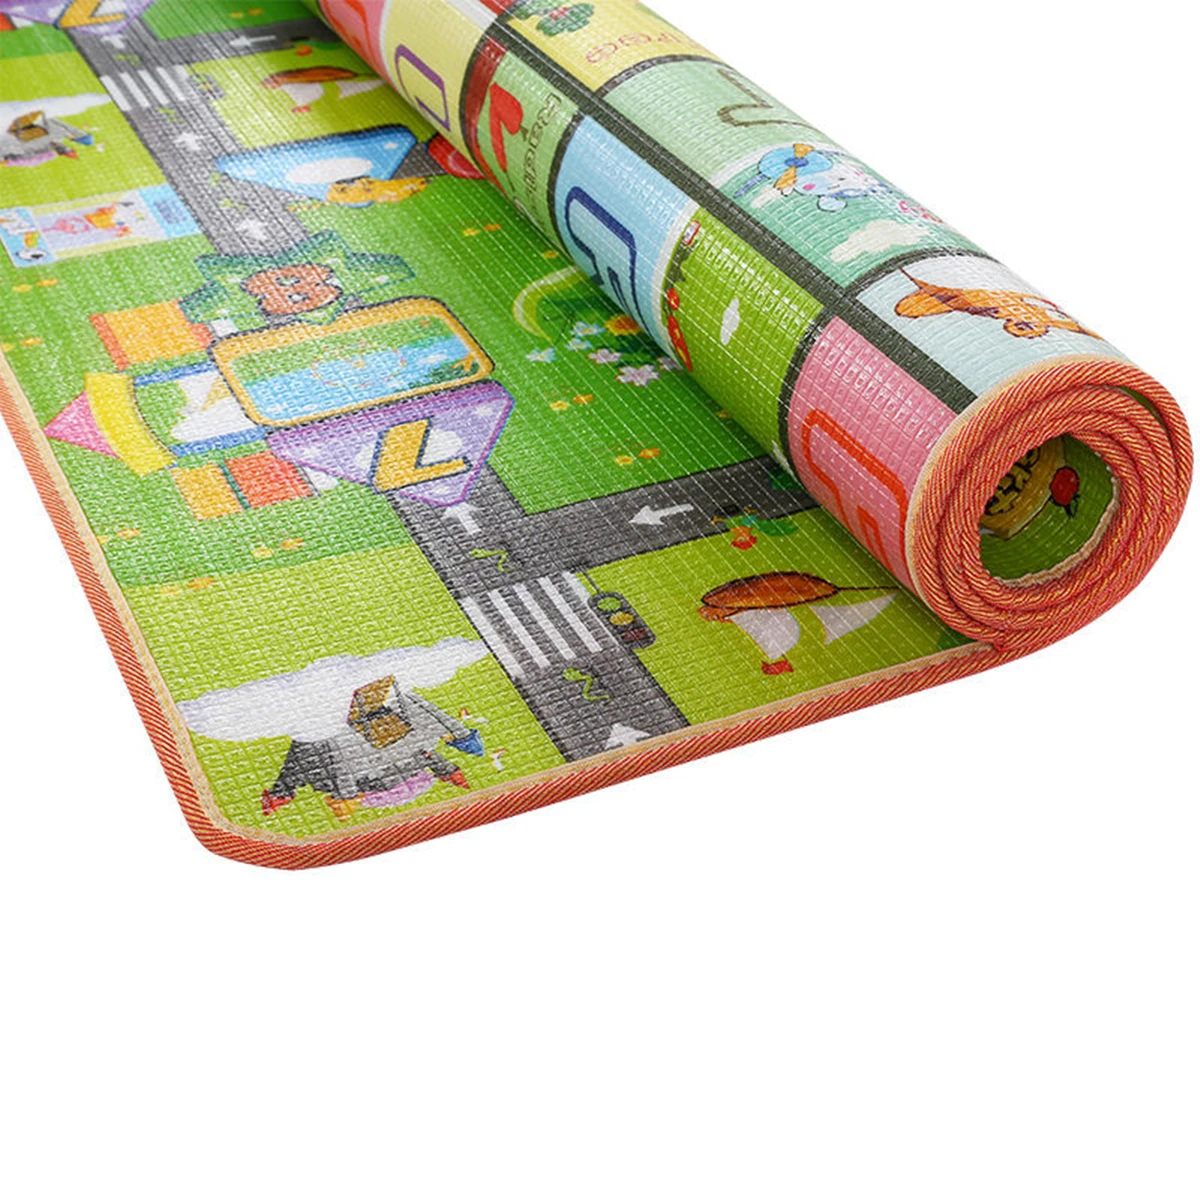 foldable playmat xpe foam crawling carpet baby play mat blanket children rug for kids educational toys soft activity game floor free global shipping